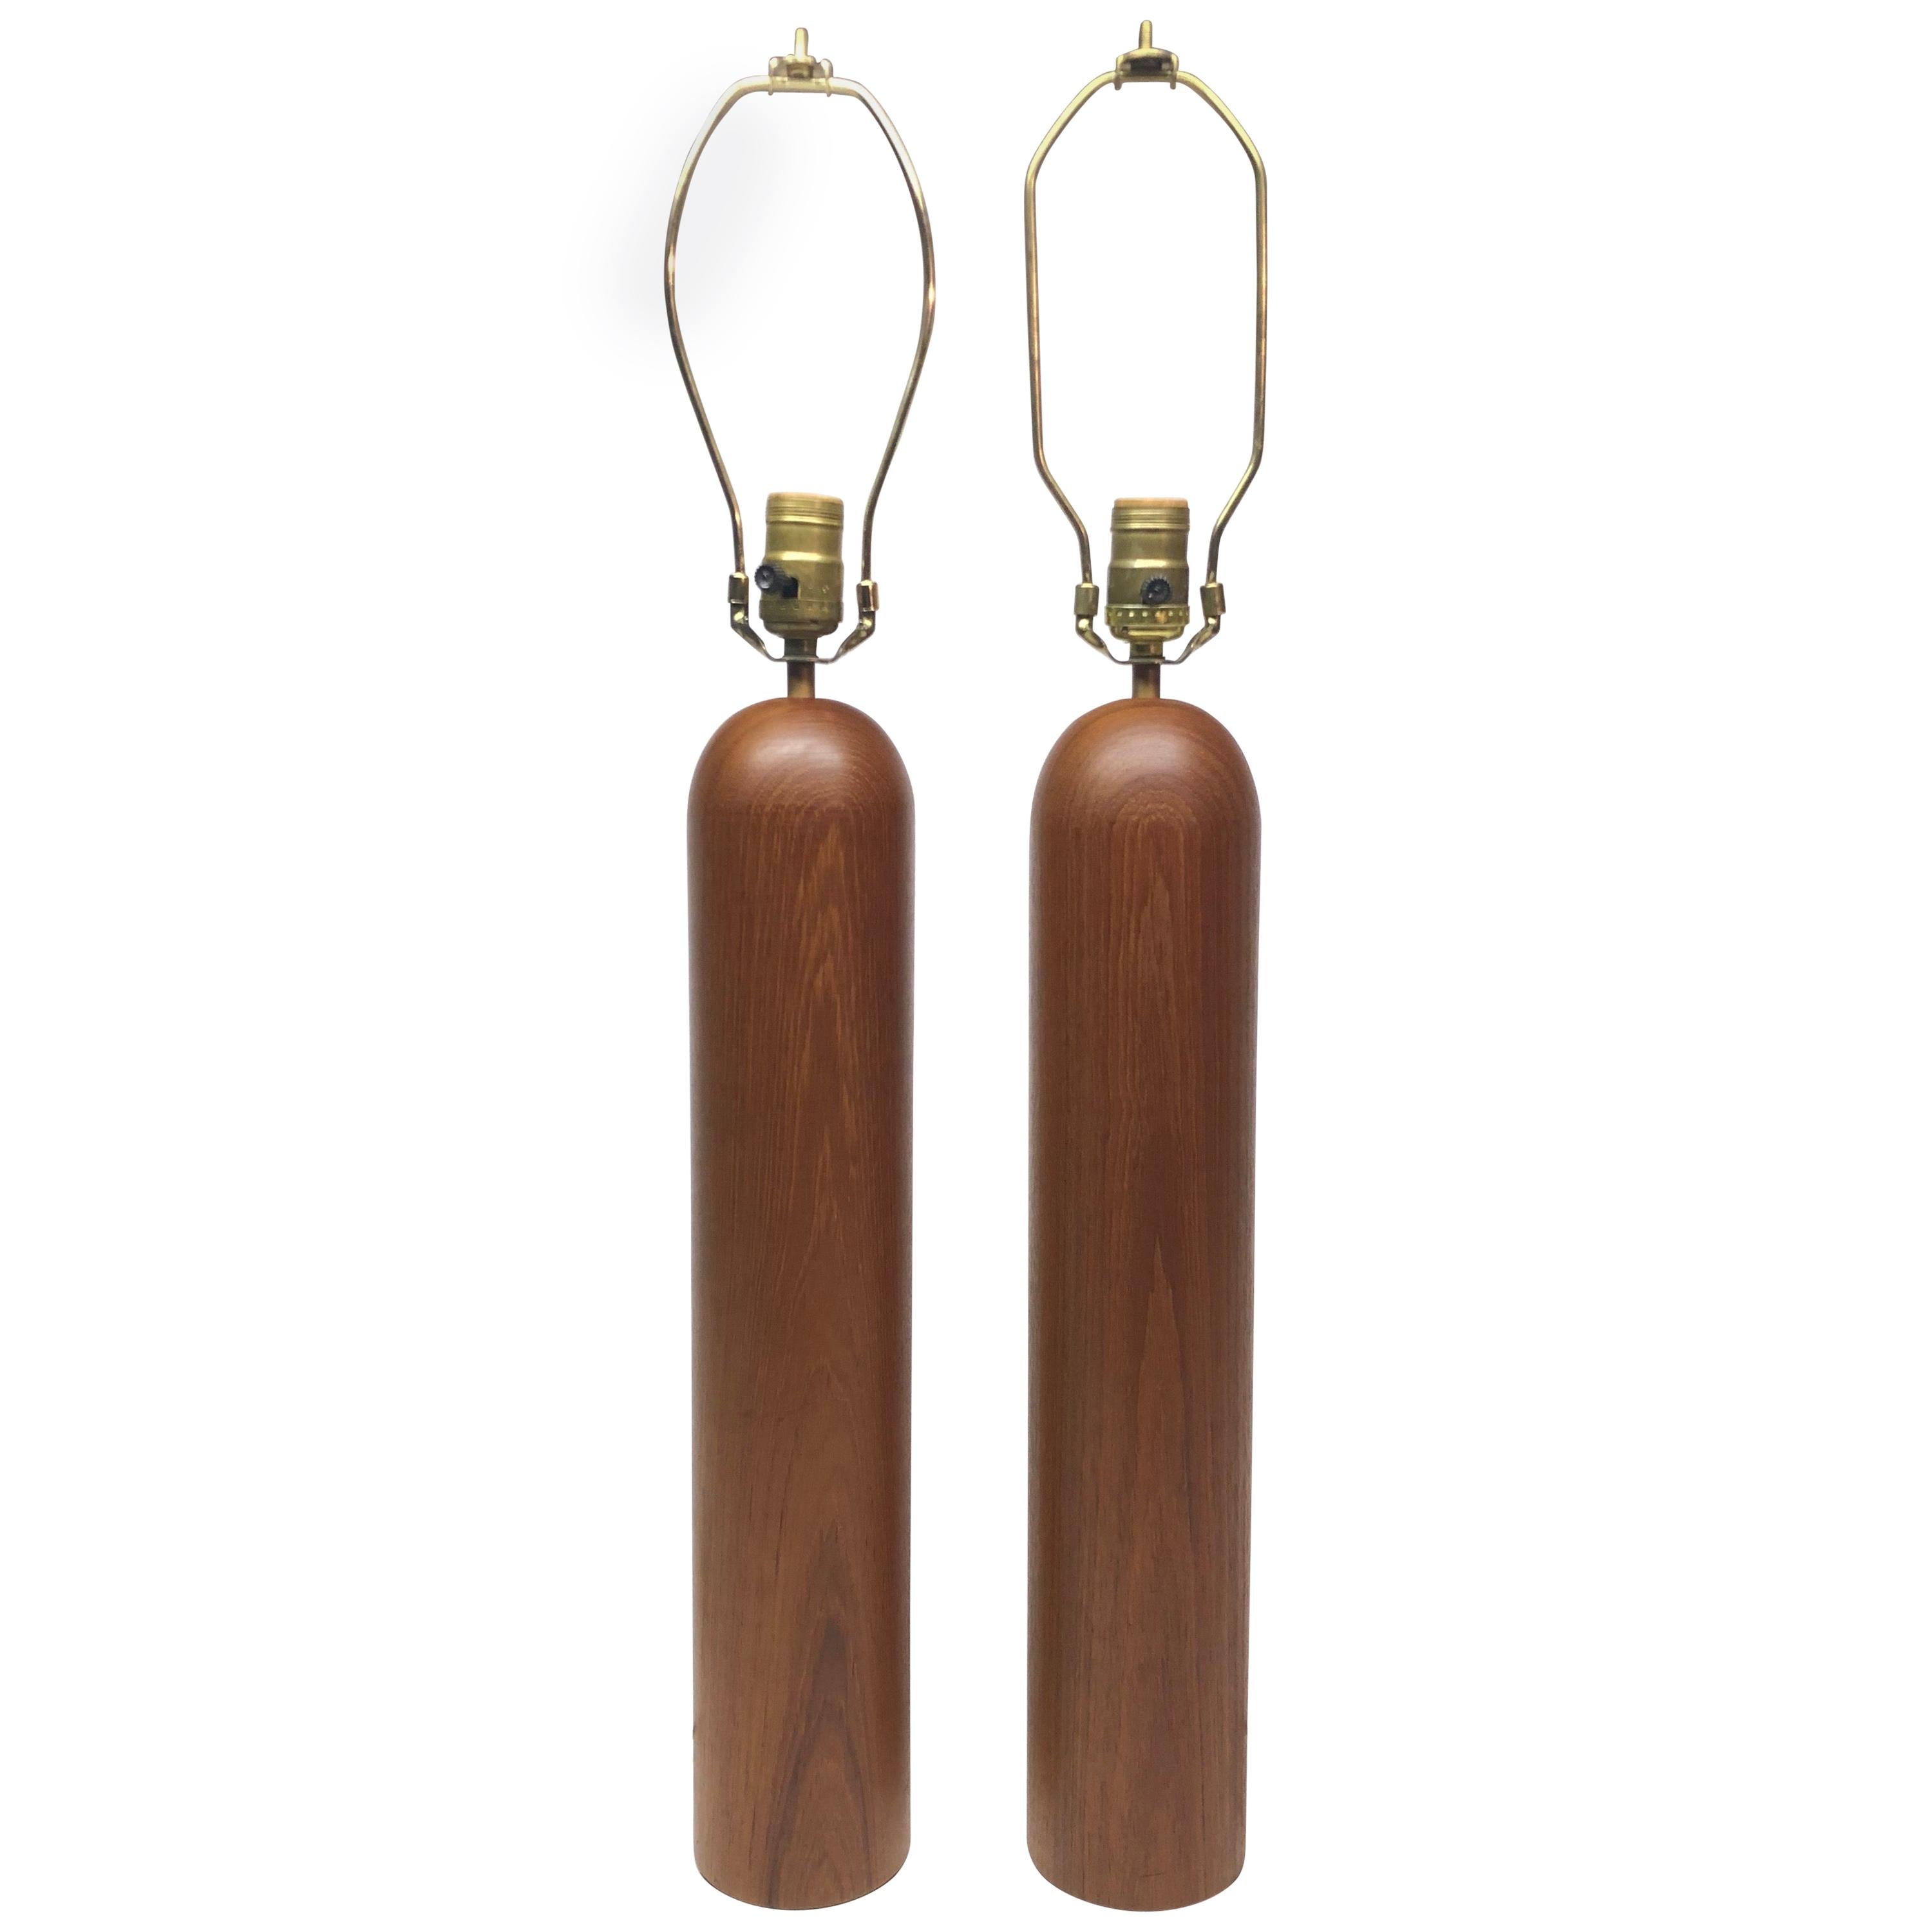 Pair of Tall Cylindrical Teak Lamps